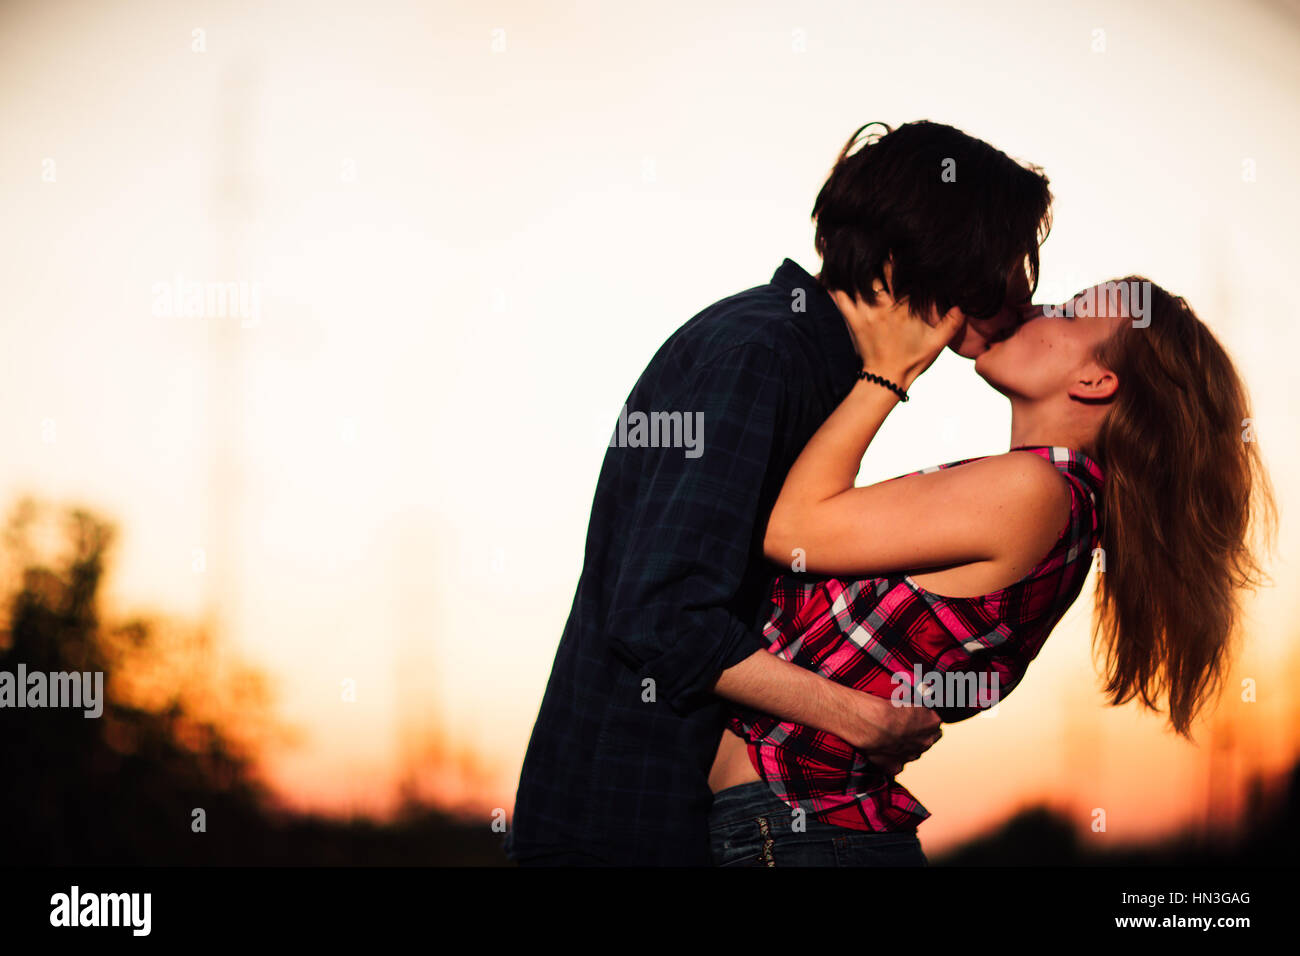 guy and the girl are standing kissing in the sunset background Stock Photo 